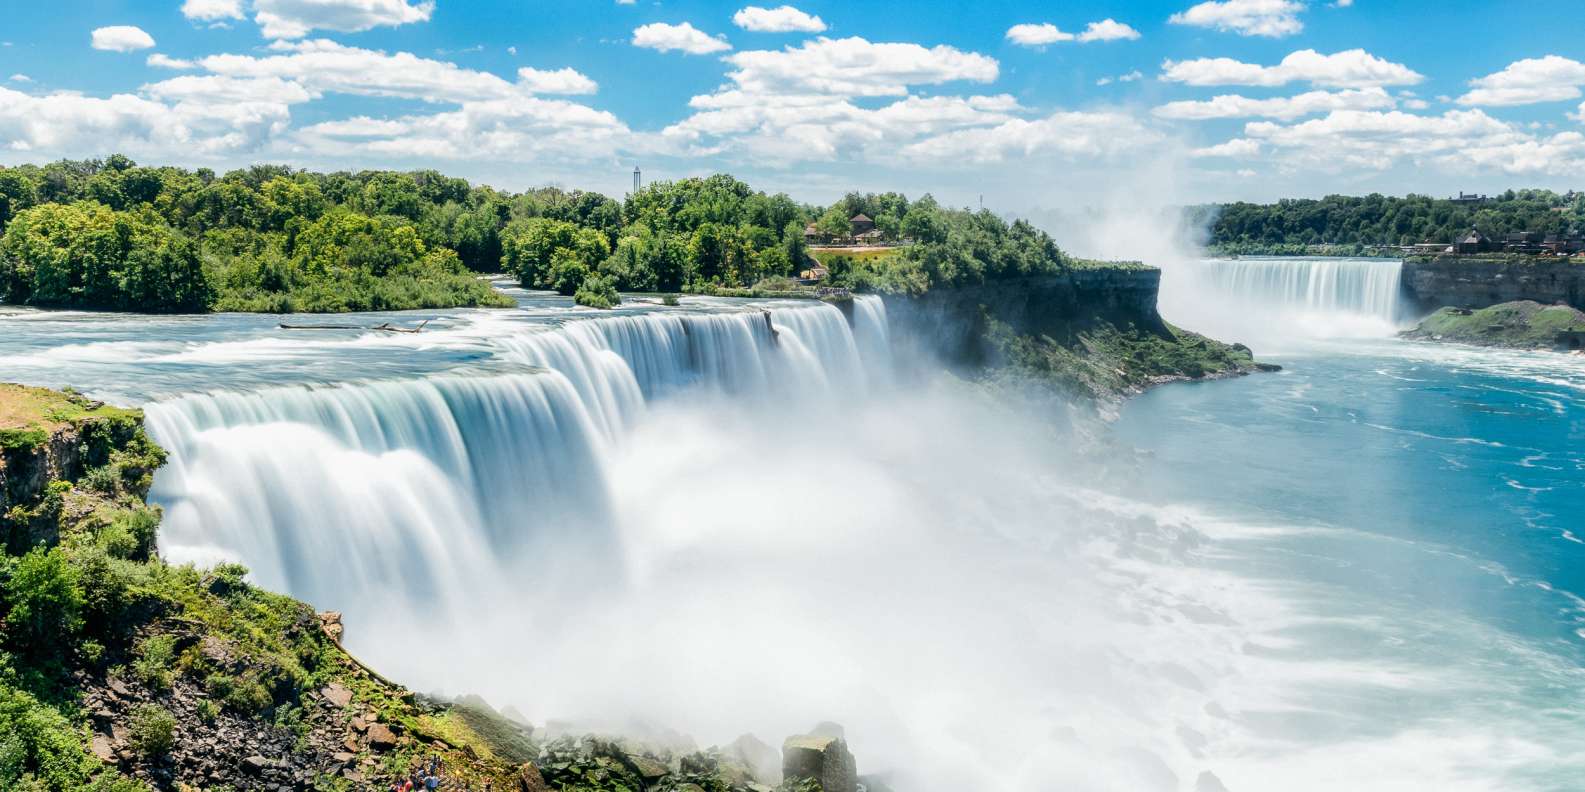 The BEST Niagara Falls, USA Tours and Excursions in 2022 – FREE Cancellation | GetYourGuide